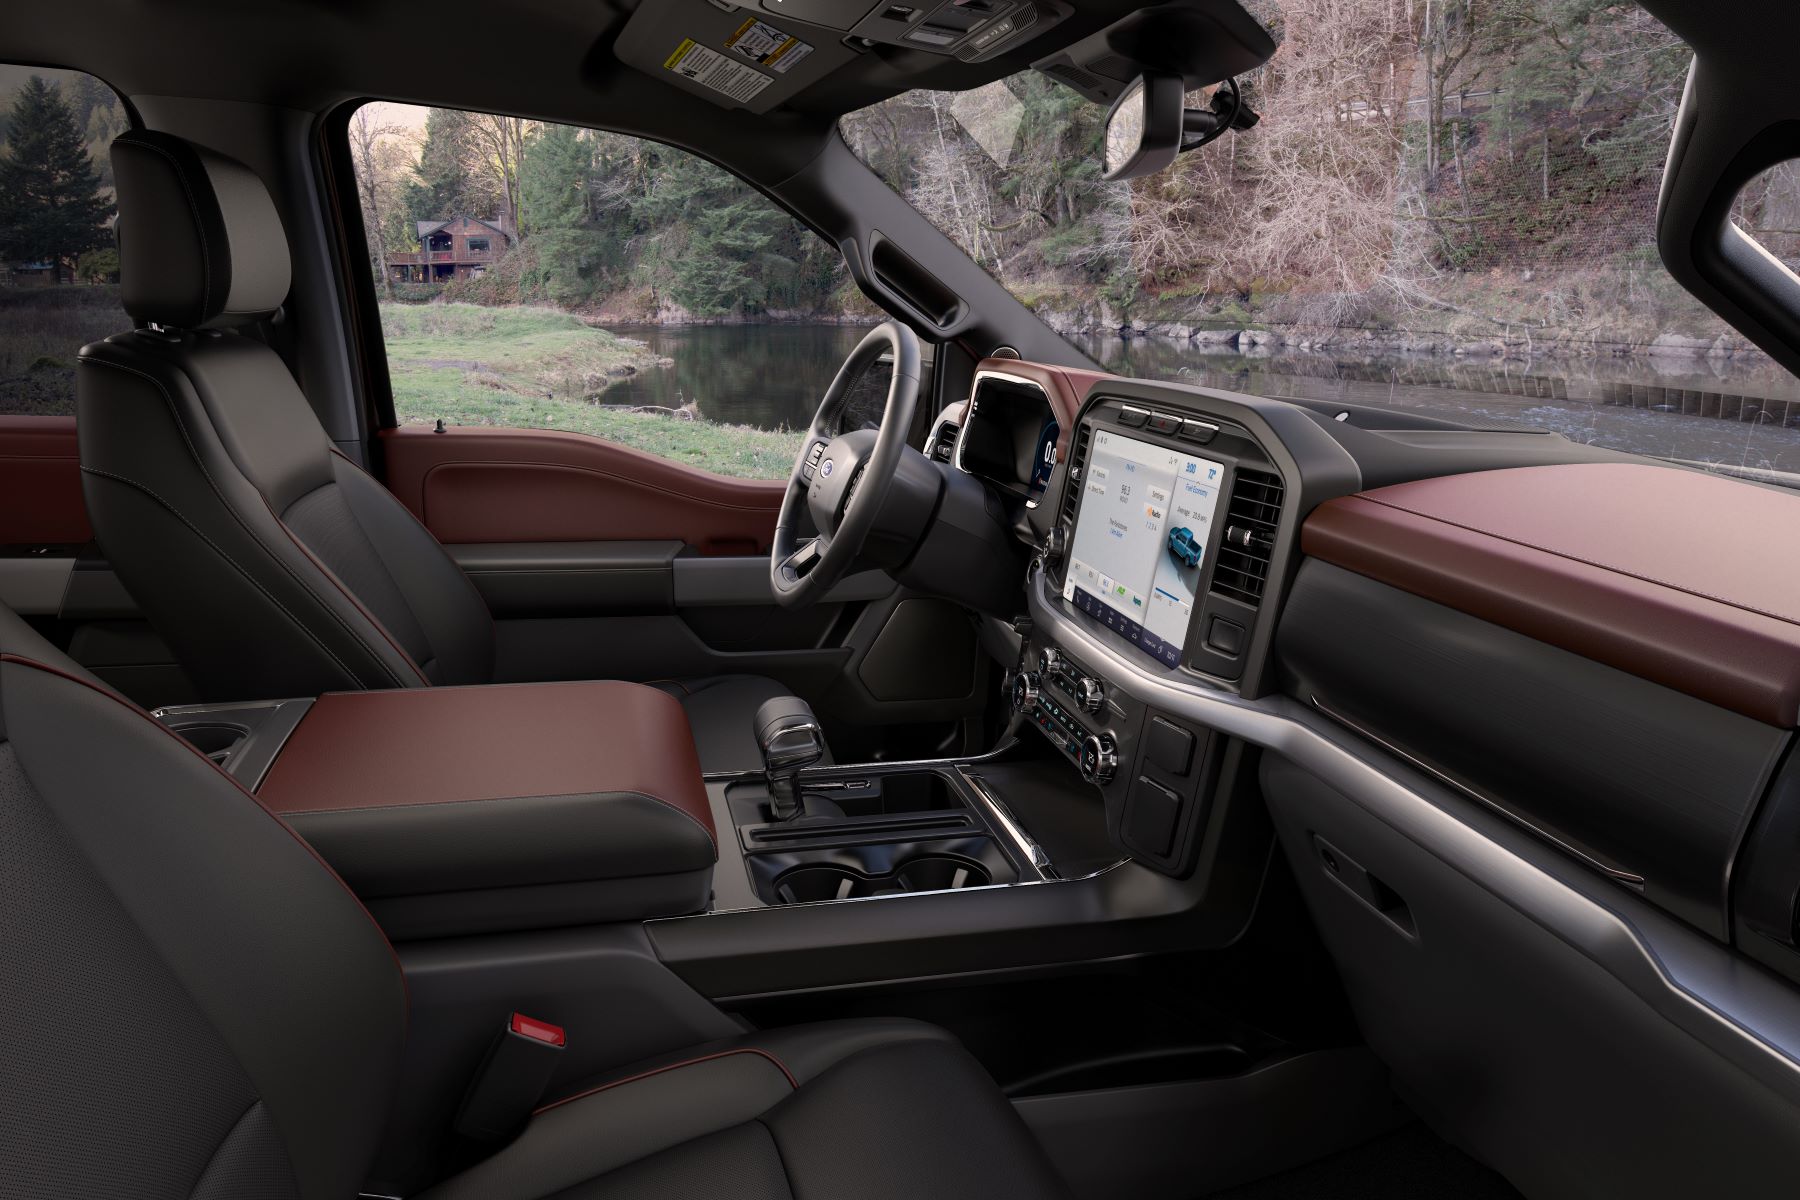 Interior of the 2021 Ford F-150 full-size pickup truck showing infotainment screen and technology features